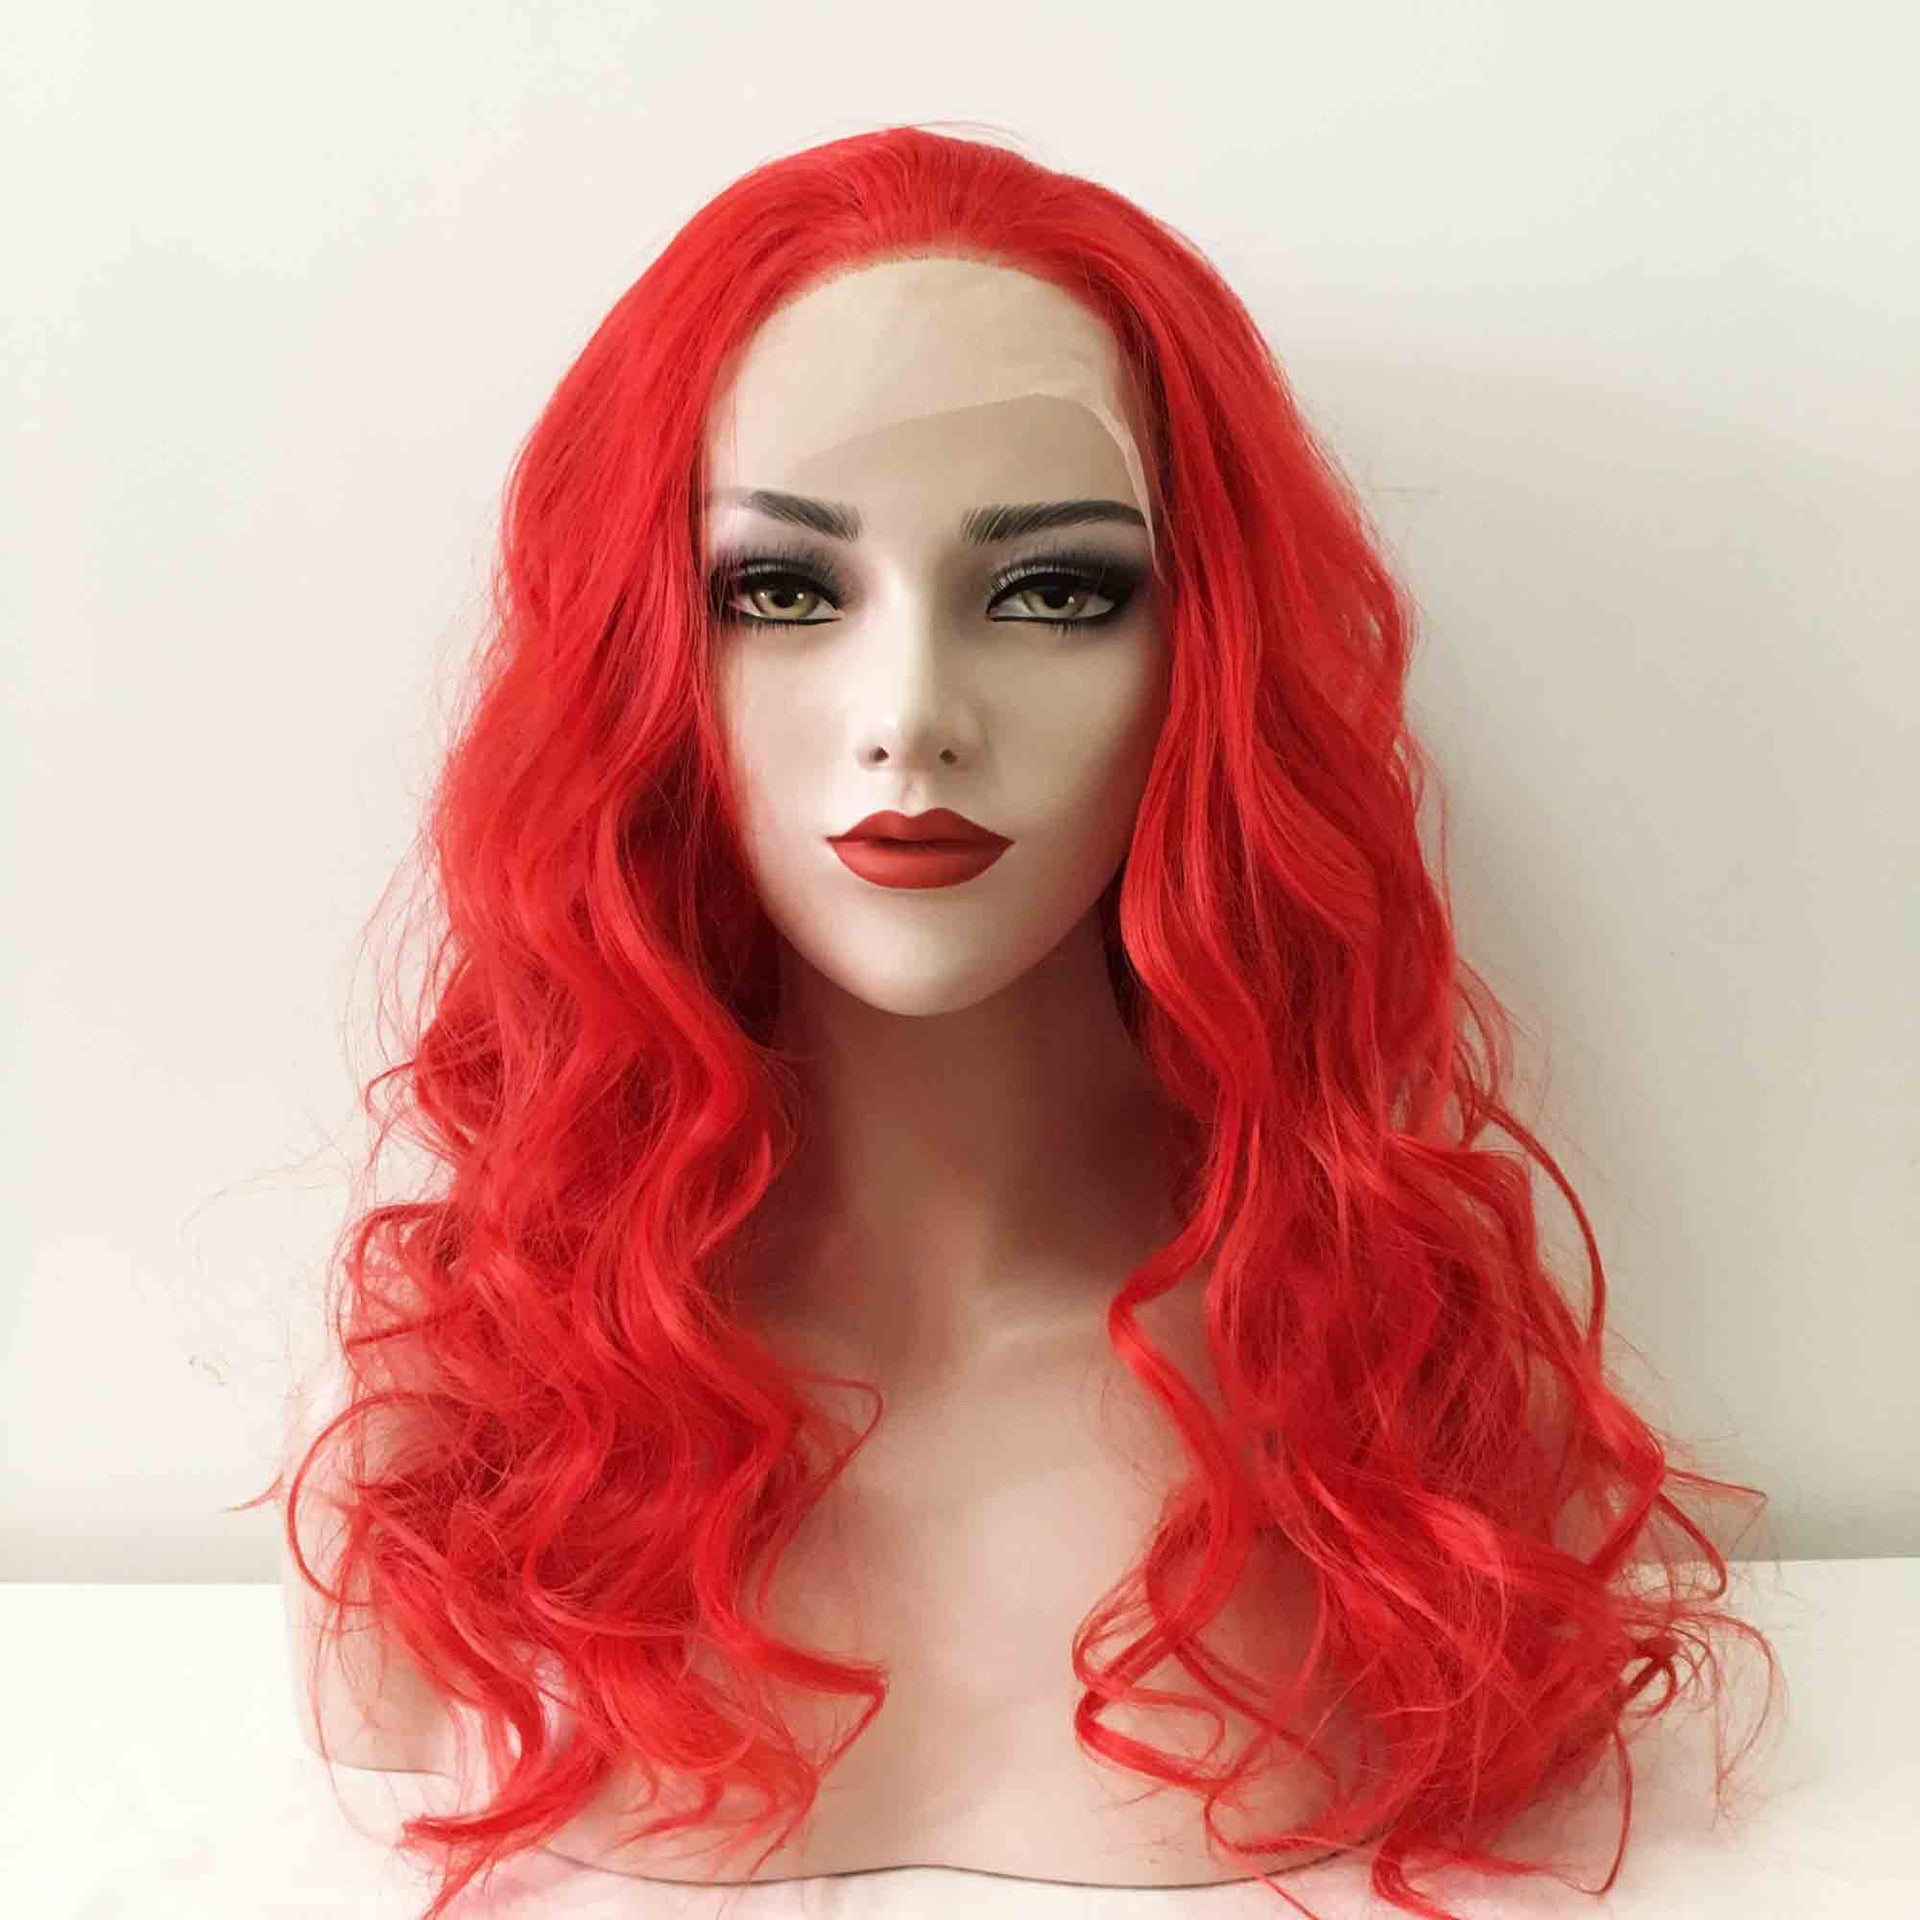 nevermindyrhead Women Lace Front Red Free Part Big Waves Curly Long Hair Costume Wig